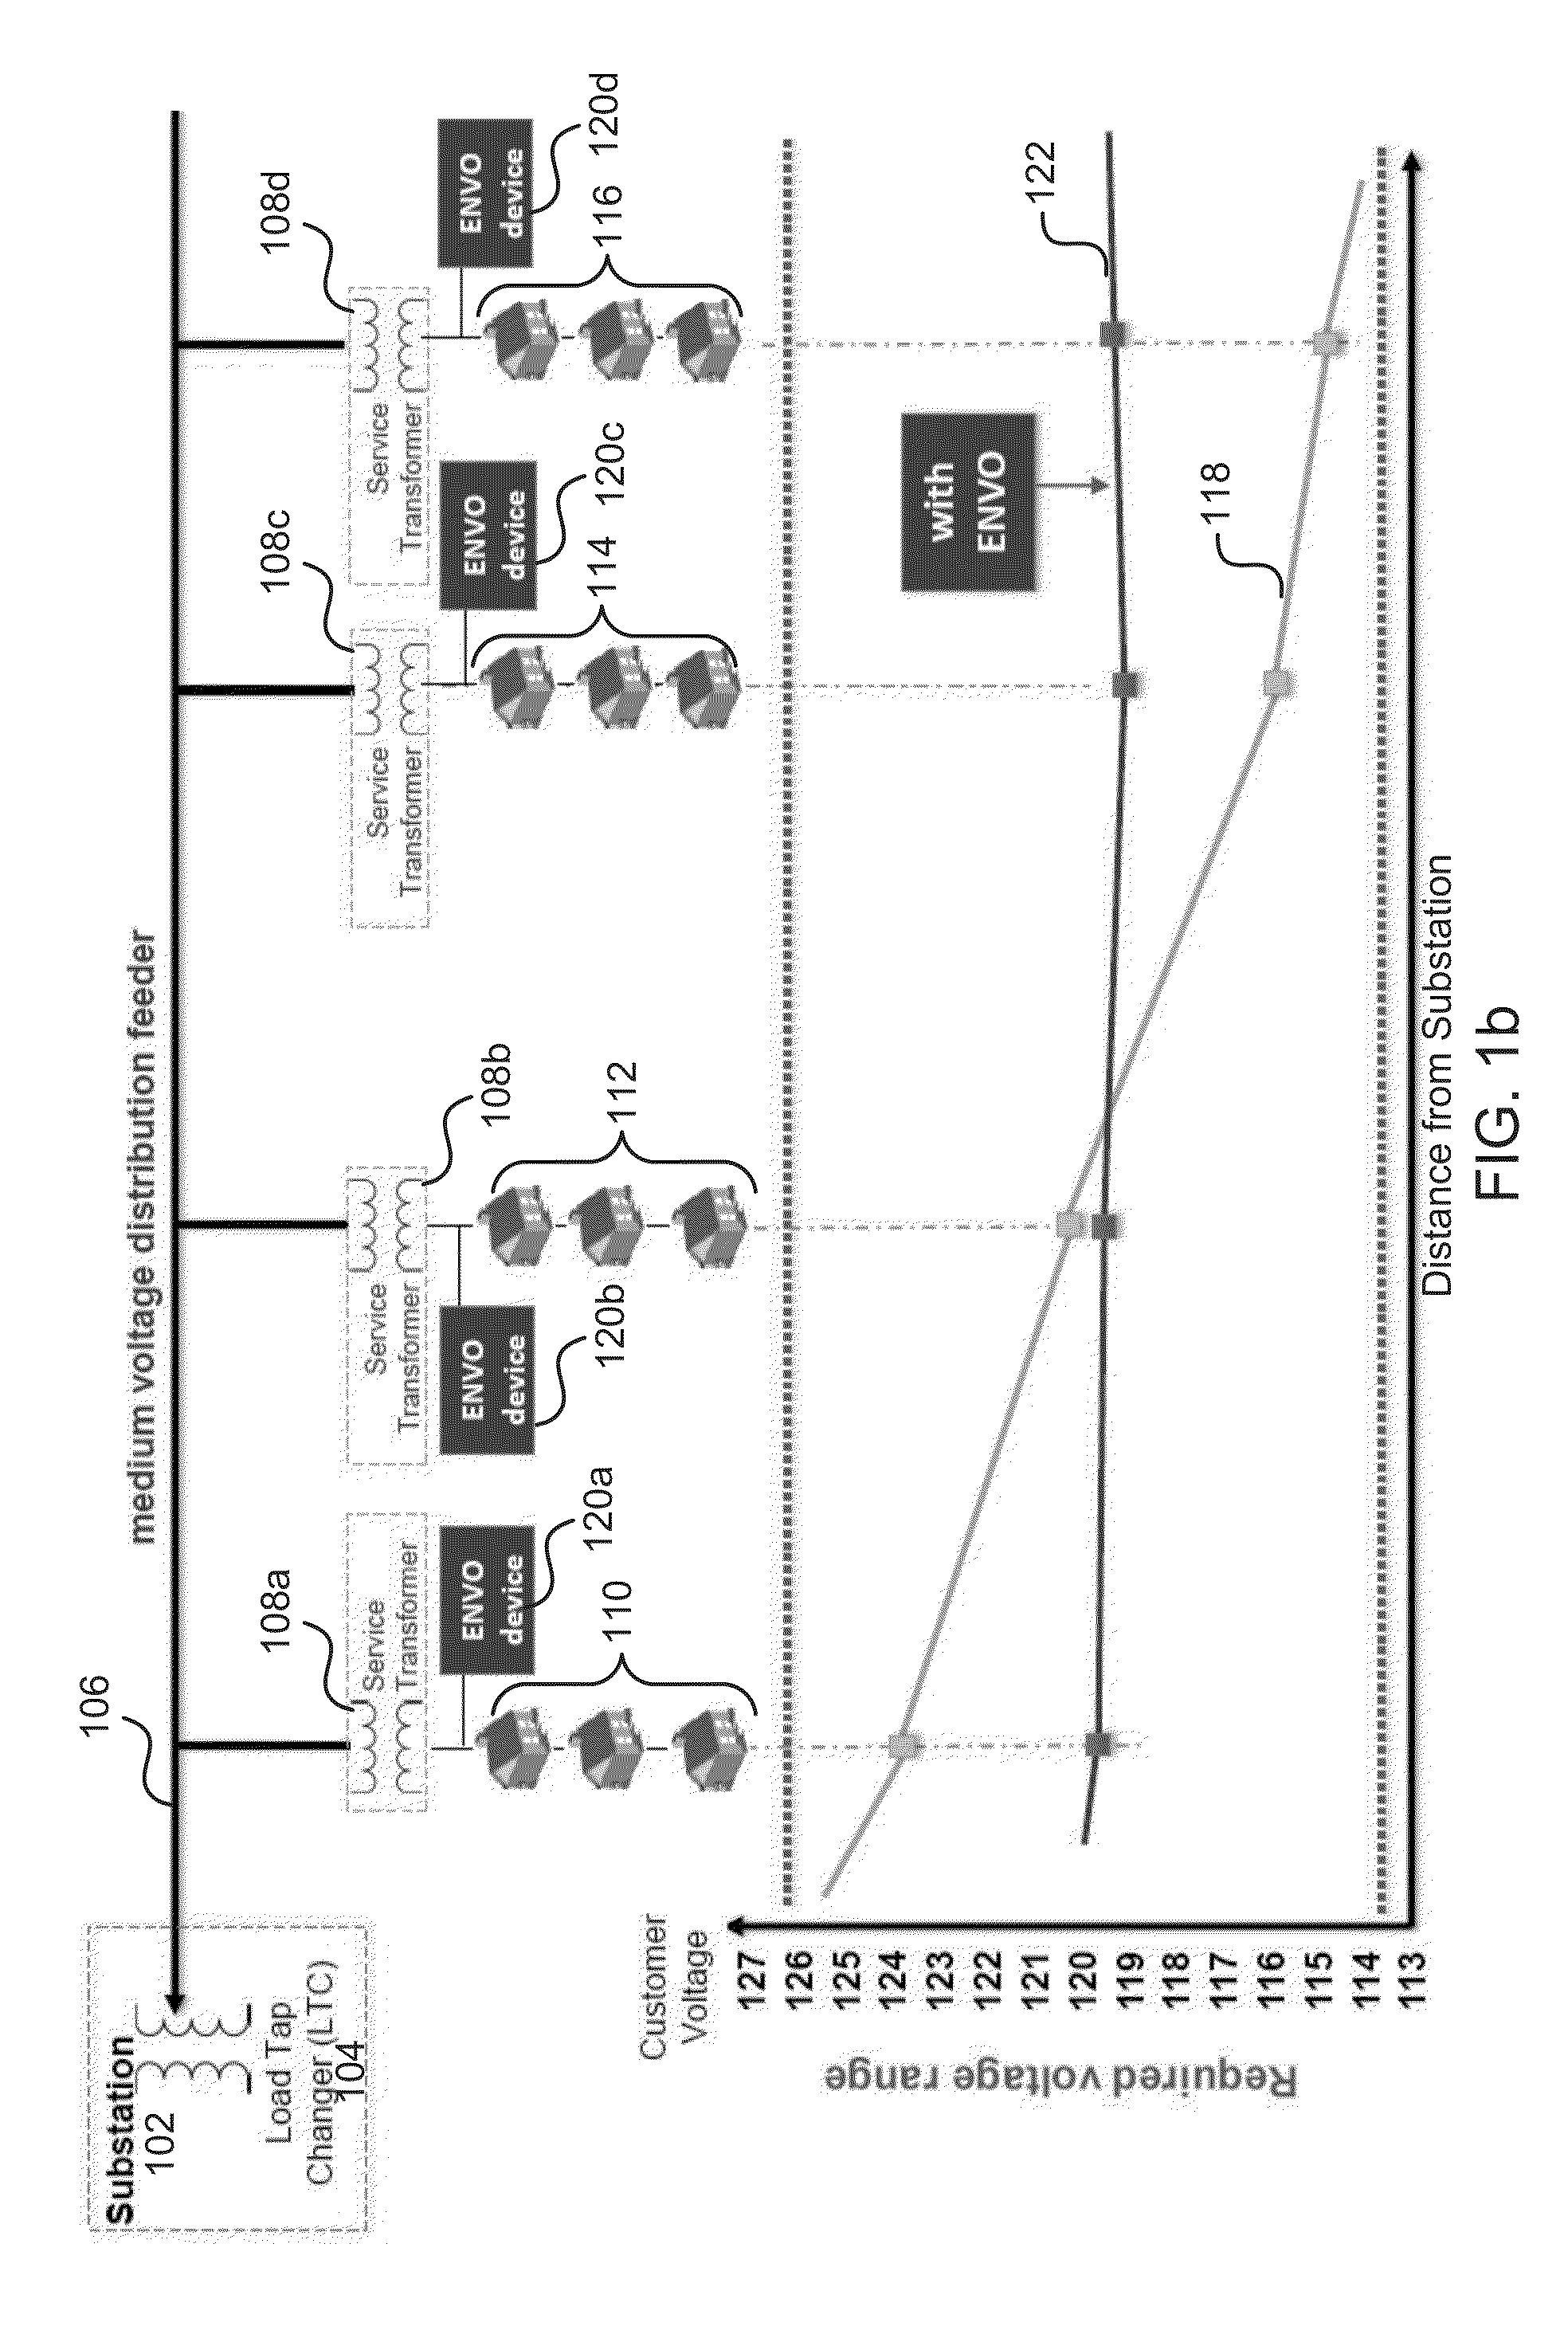 Systems and Methods for Harmonic Resonance Control